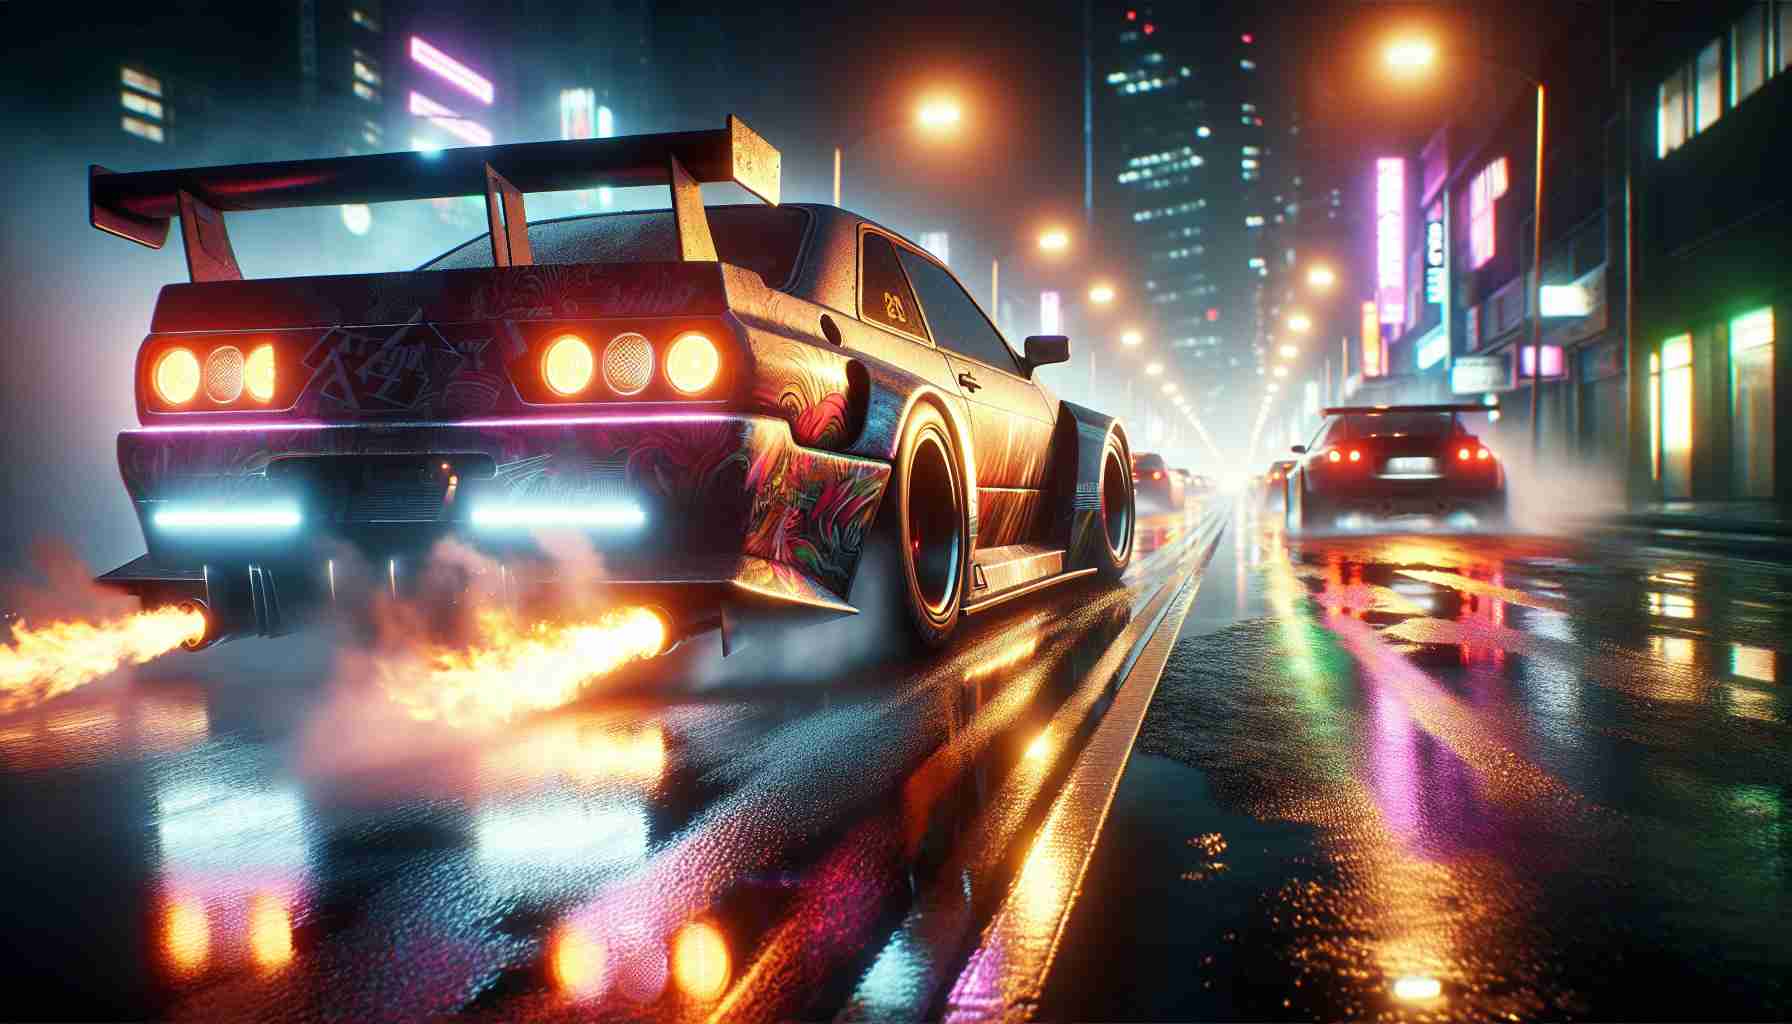 Need for Speed Heat: How To Play Multiplayer and Challenge Others